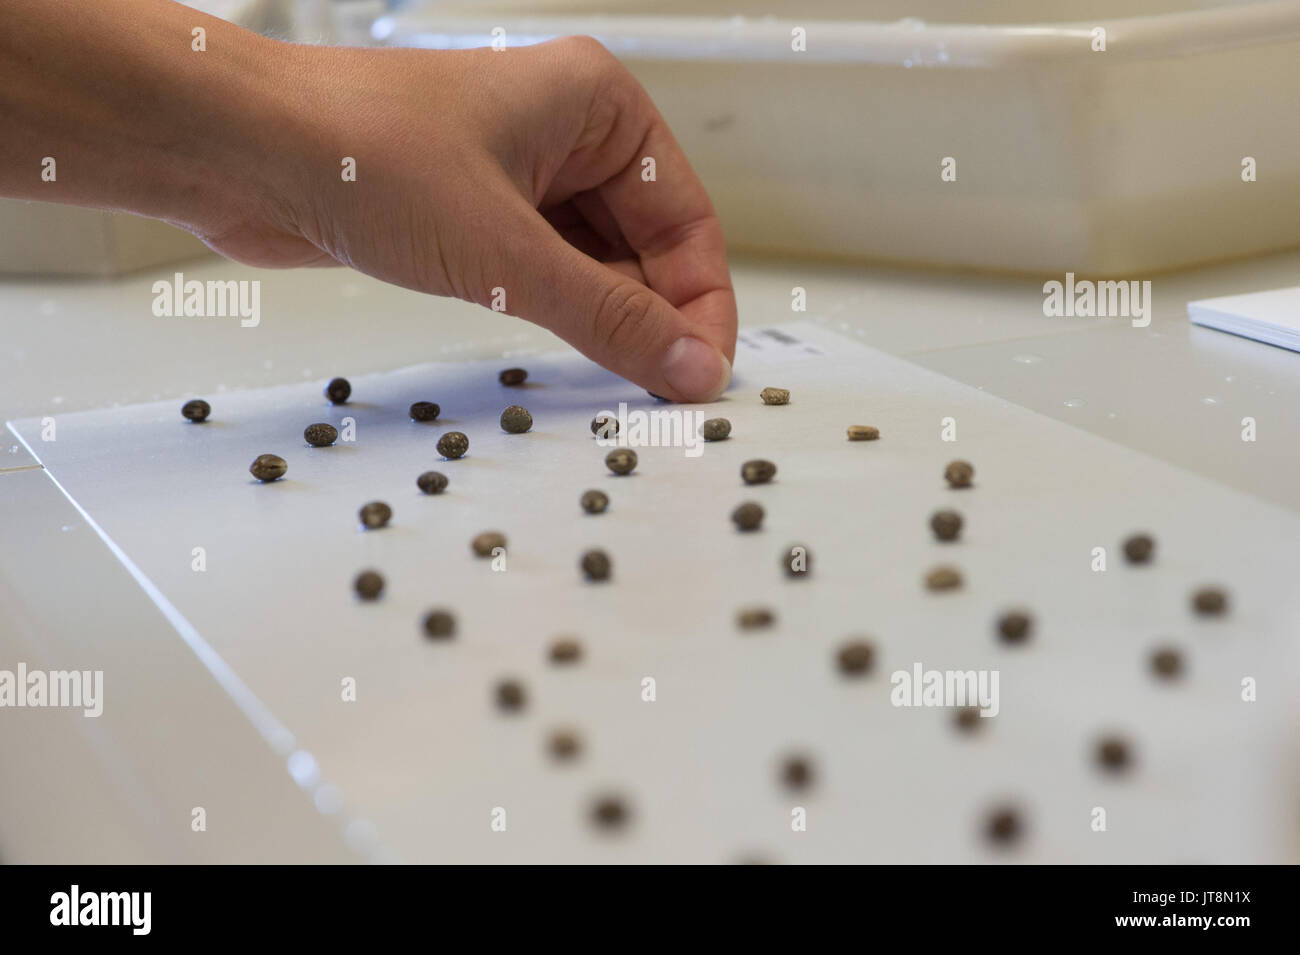 Gatersleben, Germany. 8th Aug, 2017. An employee of the Leibniz-Institute of Plant Genetics and Crop Plant Research (IPK) places lupin seeds on a damp sheet to let them germinate, in a lab at the IPK in Gatersleben, Germany, 8 August 2017. The IPK collects seeds form around the world, with 150,000 samples in its gene bank, which is the biggest in the European Union. Photo: Klaus-Dietmar Gabbert/dpa-Zentralbild/ZB/dpa/Alamy Live News Stock Photo